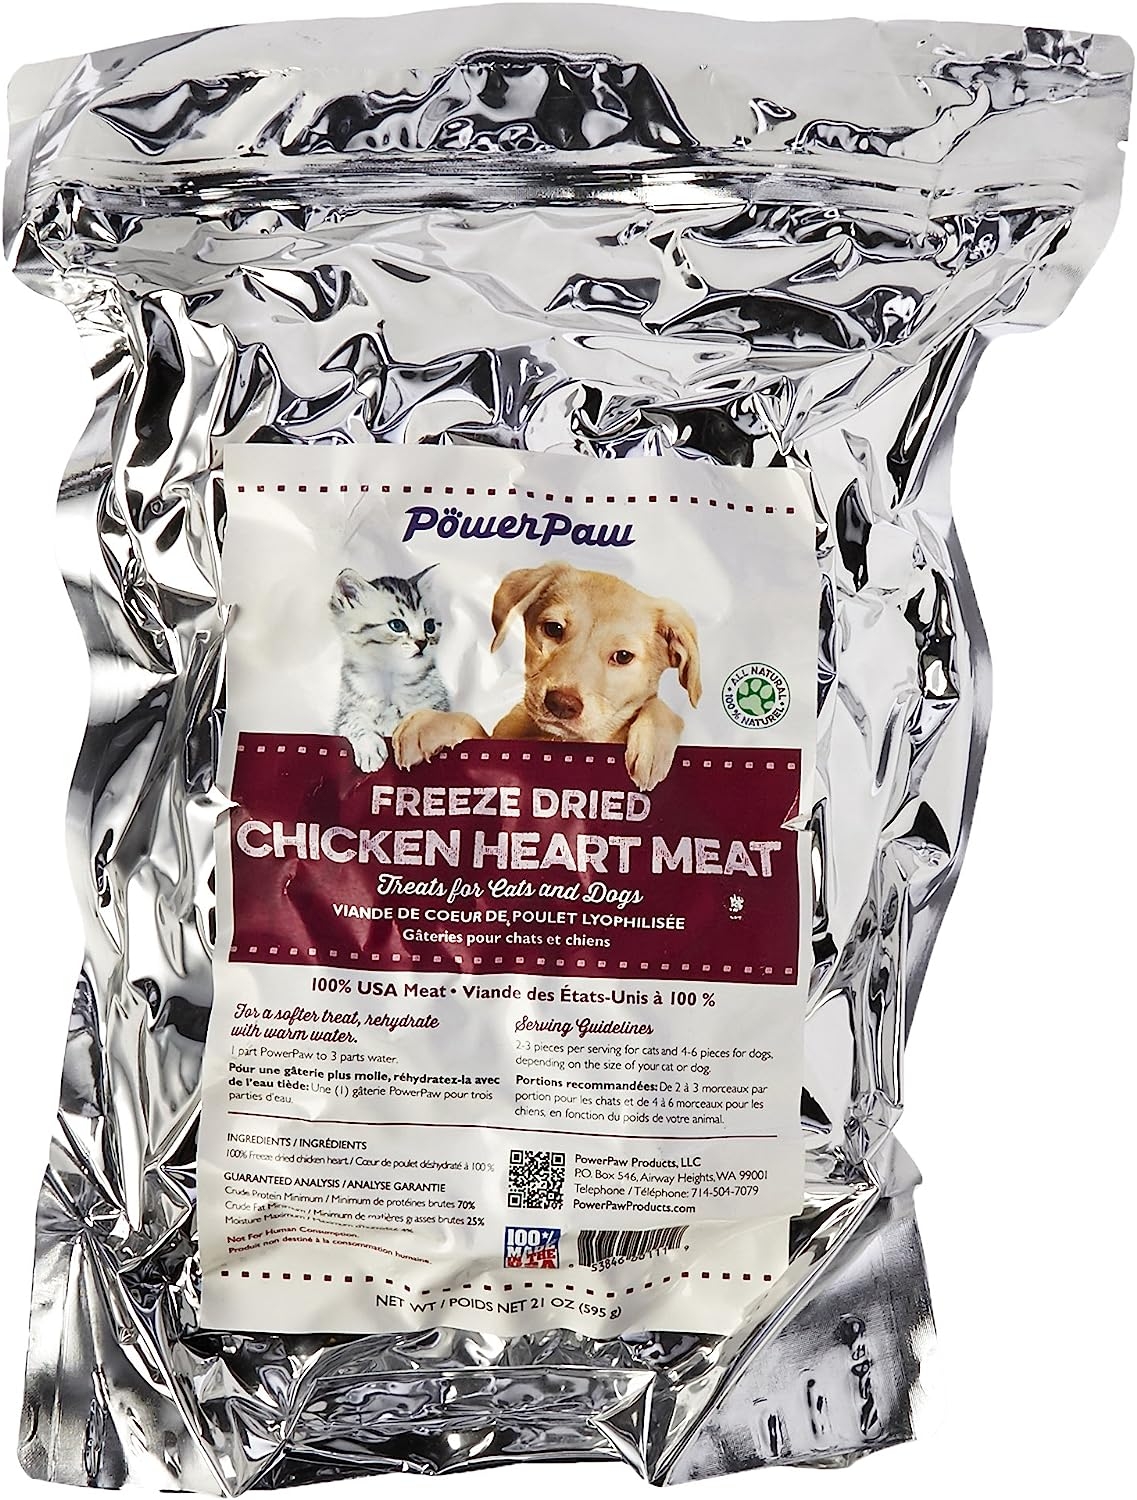 Power Paw Products 1 Pouch Freeze Dried Chicken Hearts, 21 Oz   price checker   price checker Description Gallery Reviews